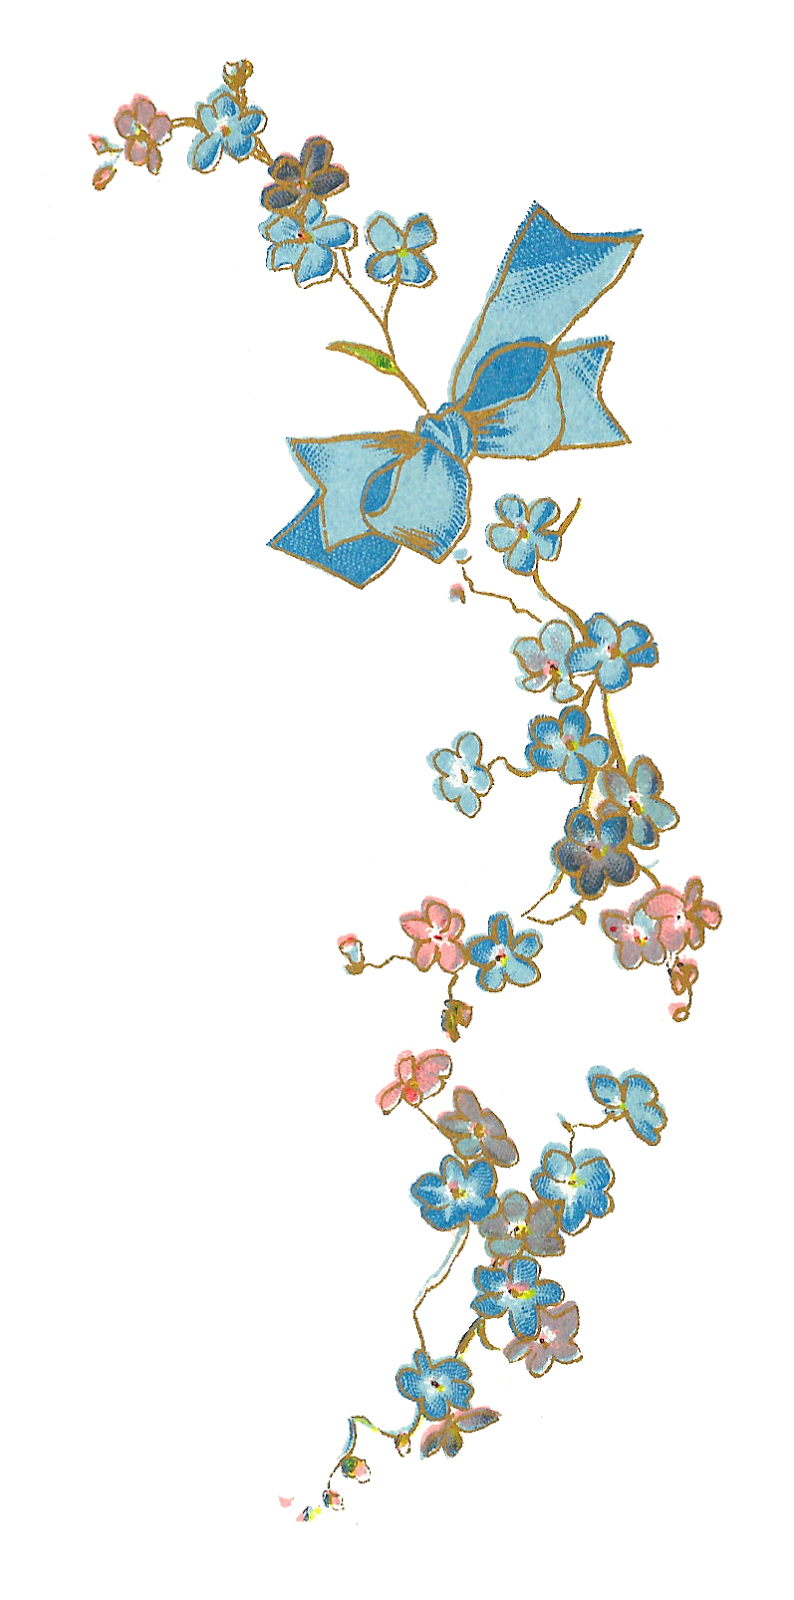 This Is A Very Pretty Vintage Graphic Of Forget Me Not Flowers From A